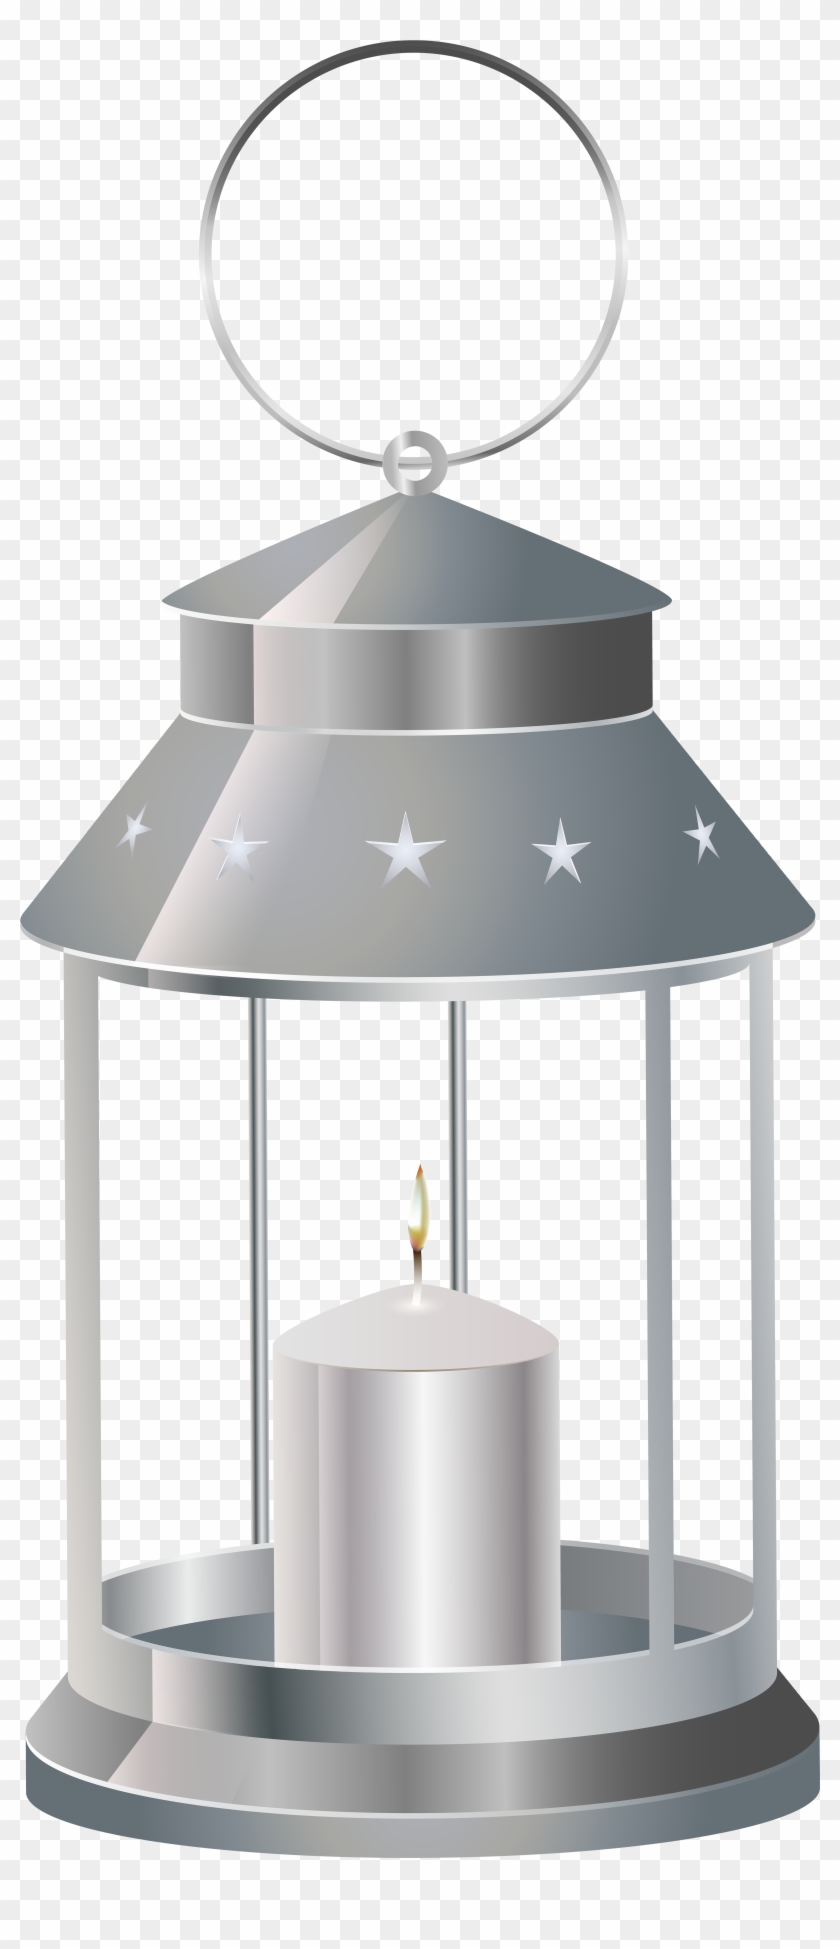 Silver Lantern With Candle Png Transparent Clip Art - Lantern Clipart Transparent Background #959856